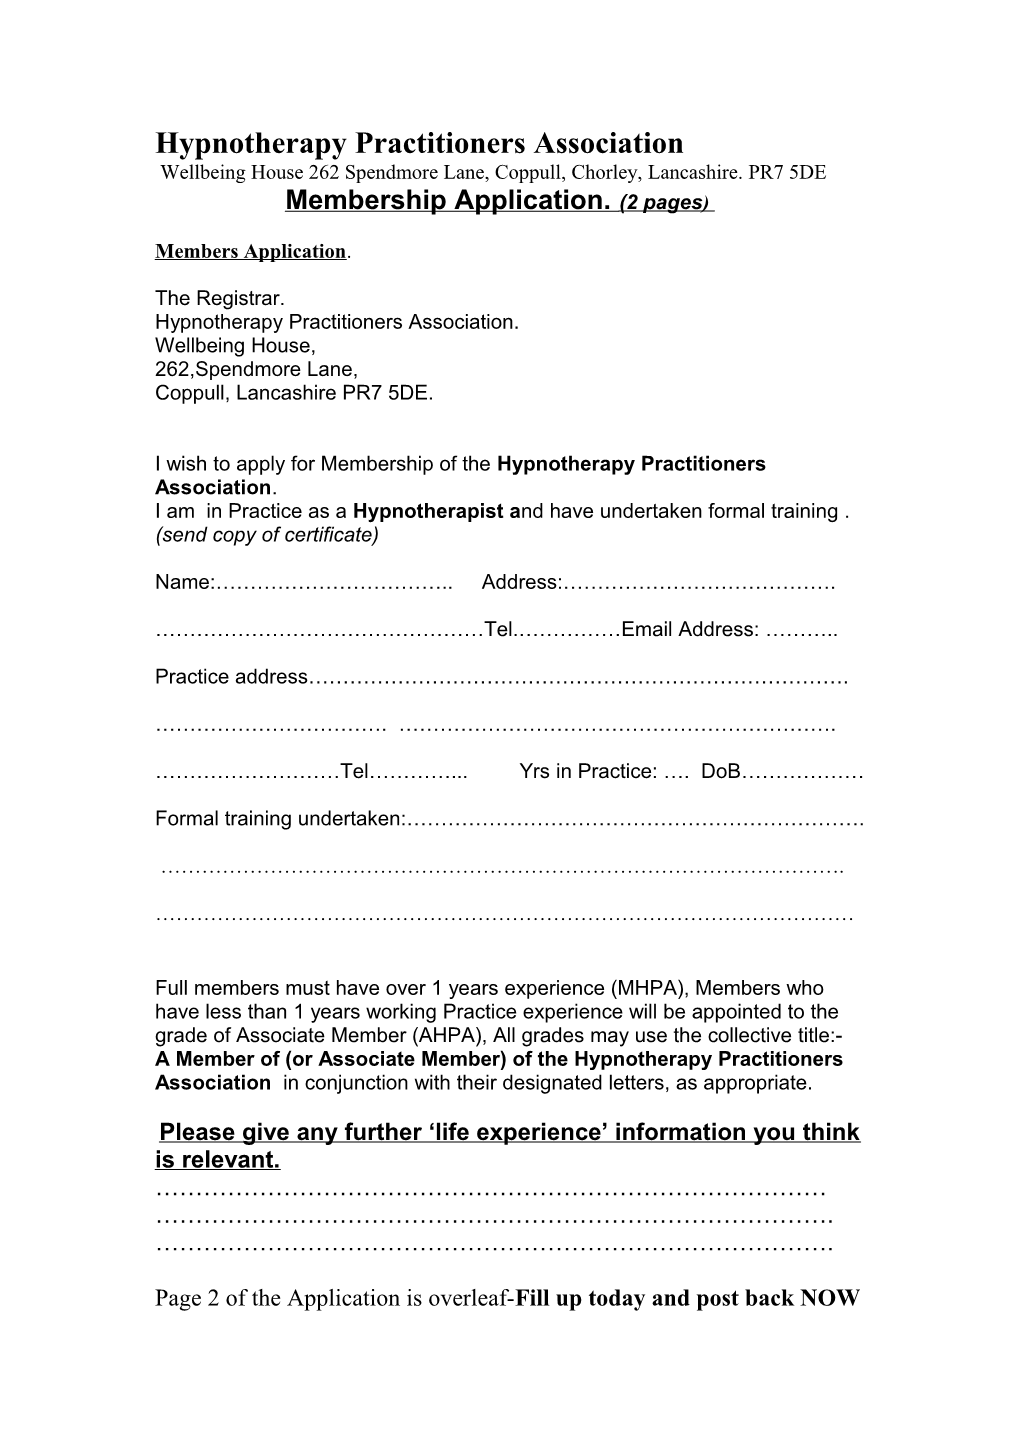 Hypnotherapy Practitioners Association Membership Application